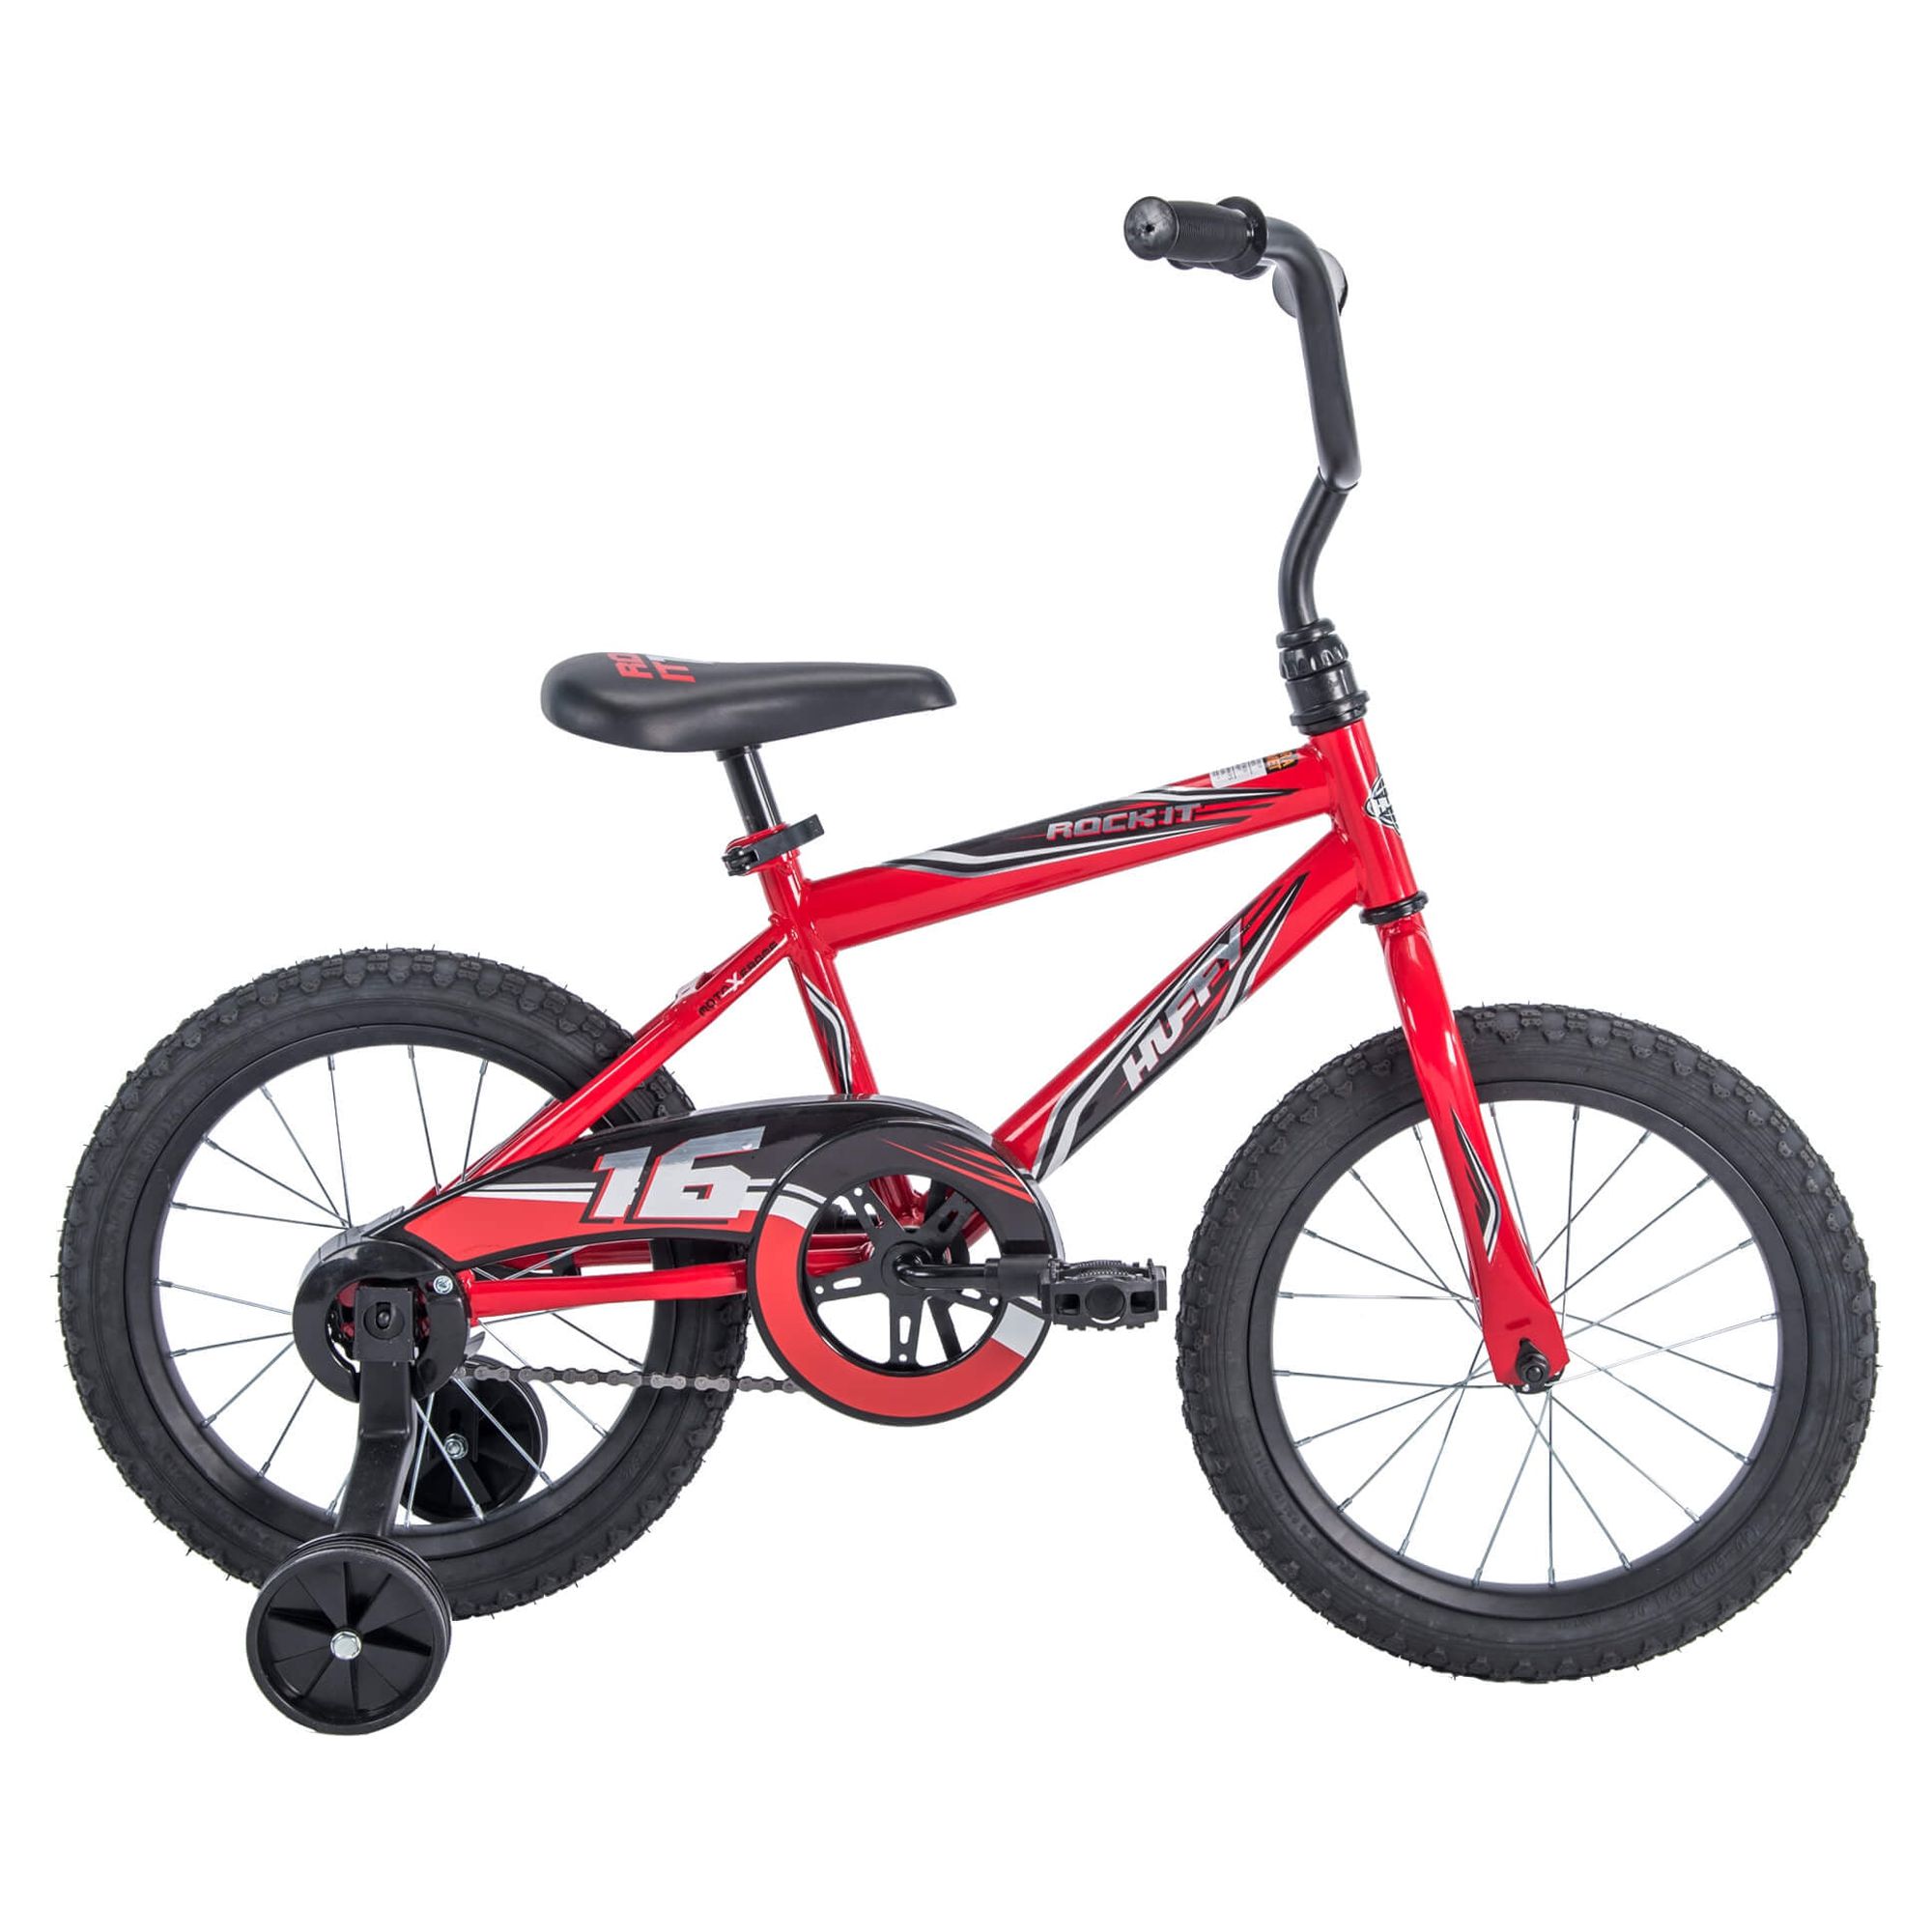 Huffy 16 in. Rock It Kids Bike for Boy Ages 4 and up, Child, Red - image 1 of 10